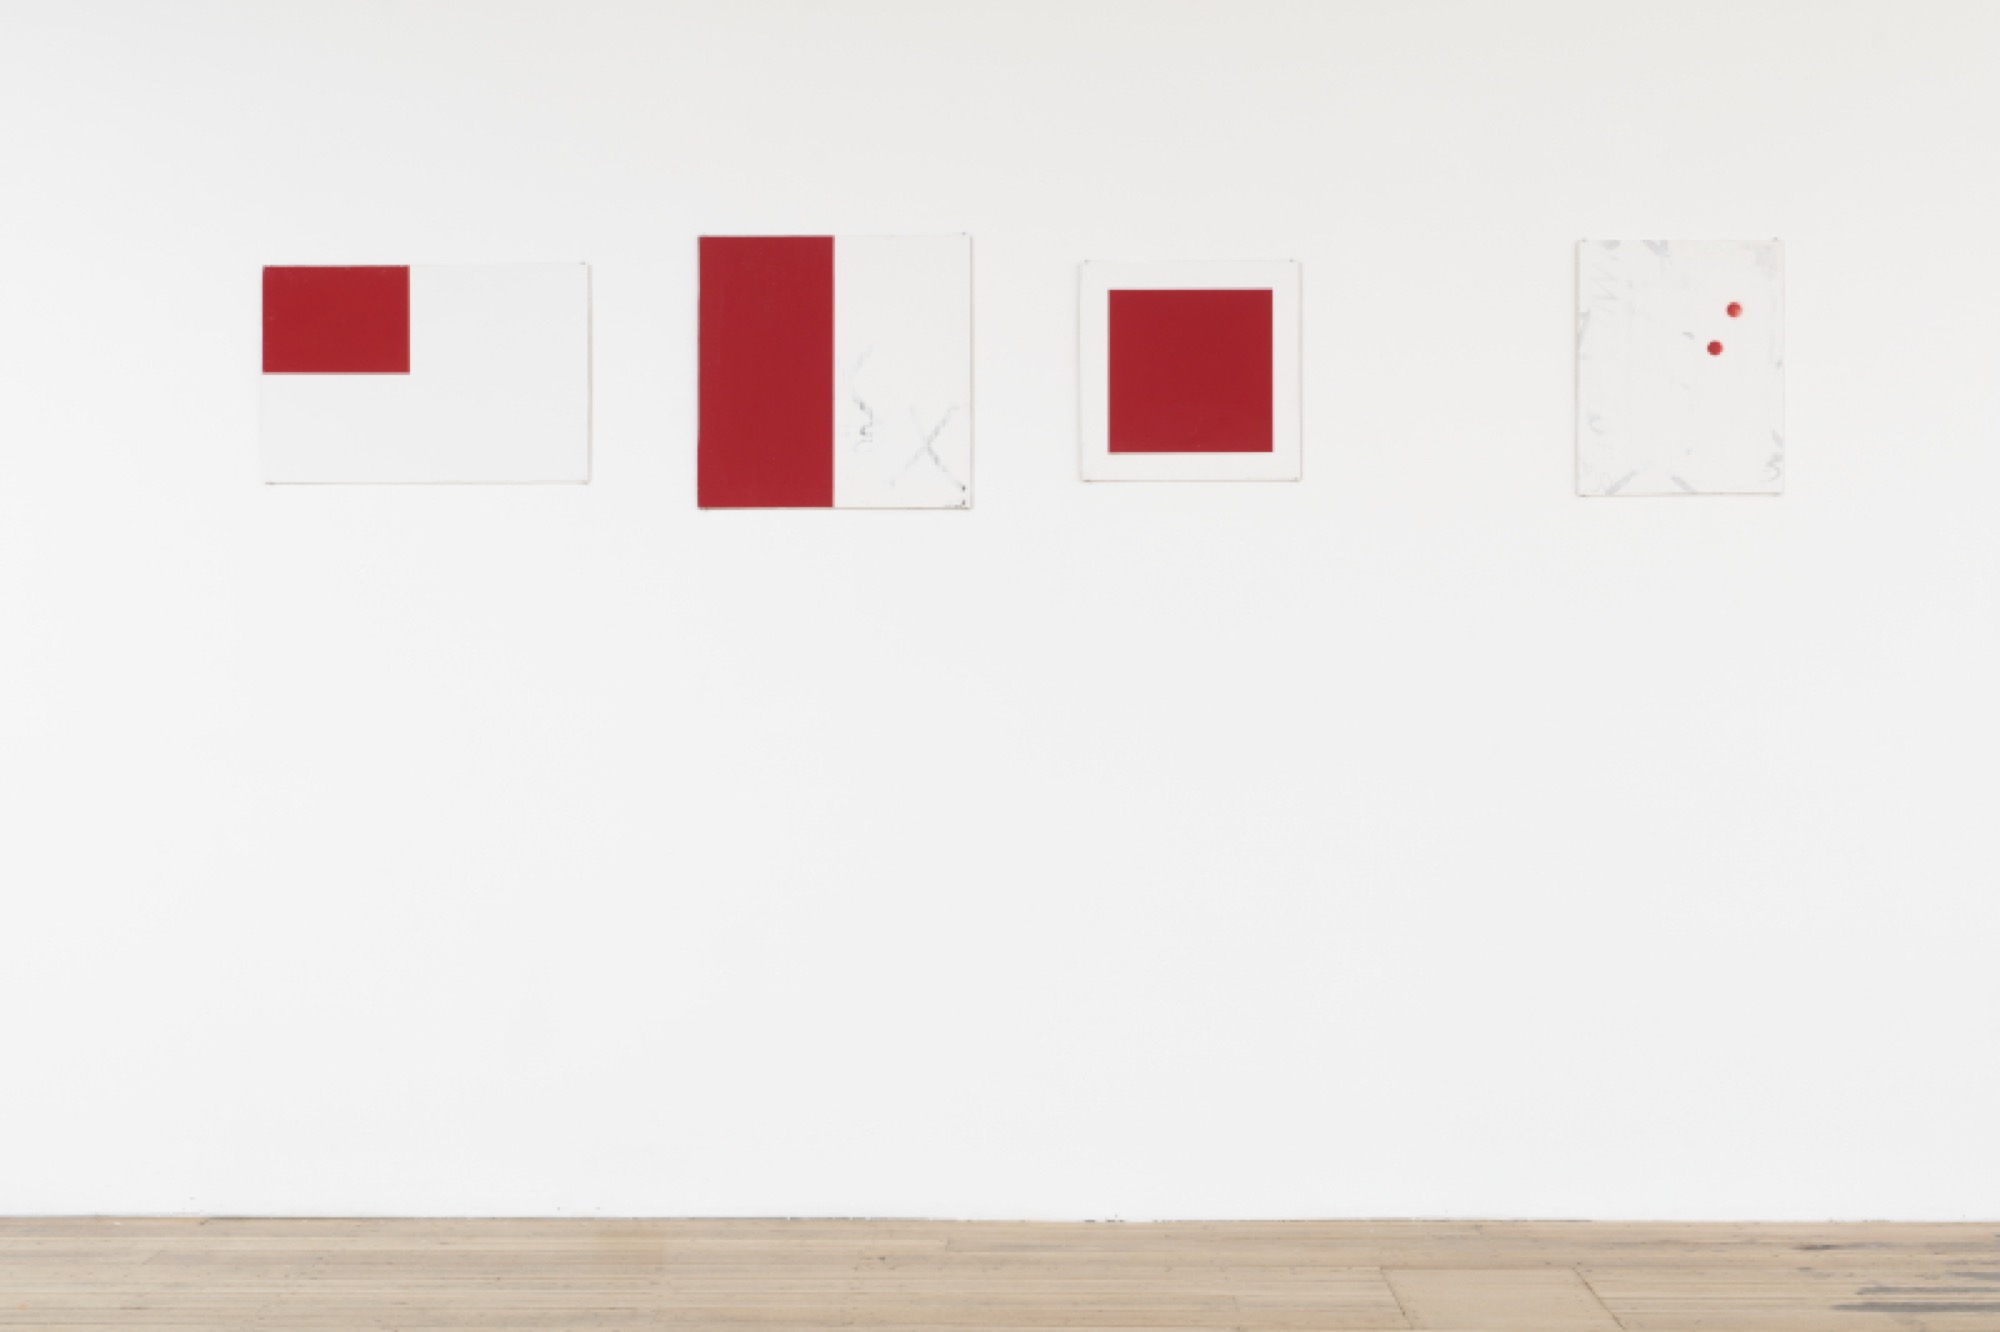 Scott Redford (installation view, left to right), <em>Untitled (Blank flag/The red acrylic mixed with AZT)</em> 1998, enamel, acrylic and AZT on board; <em>Untitled (the red acrylic paint mixed with AZT)</em> 1998, enamel, acrylic and AZT on board; <em>Untitled (Red square/ the red acrylic mixed with AZT)</em> 1998, enamel, acrylic and AZT on board; <em>Above the elbow on the guy’s arm at the Wickham 3rd version</em>, 1997, enamel and acrylic on board. Photograph: Matthew Stanton.